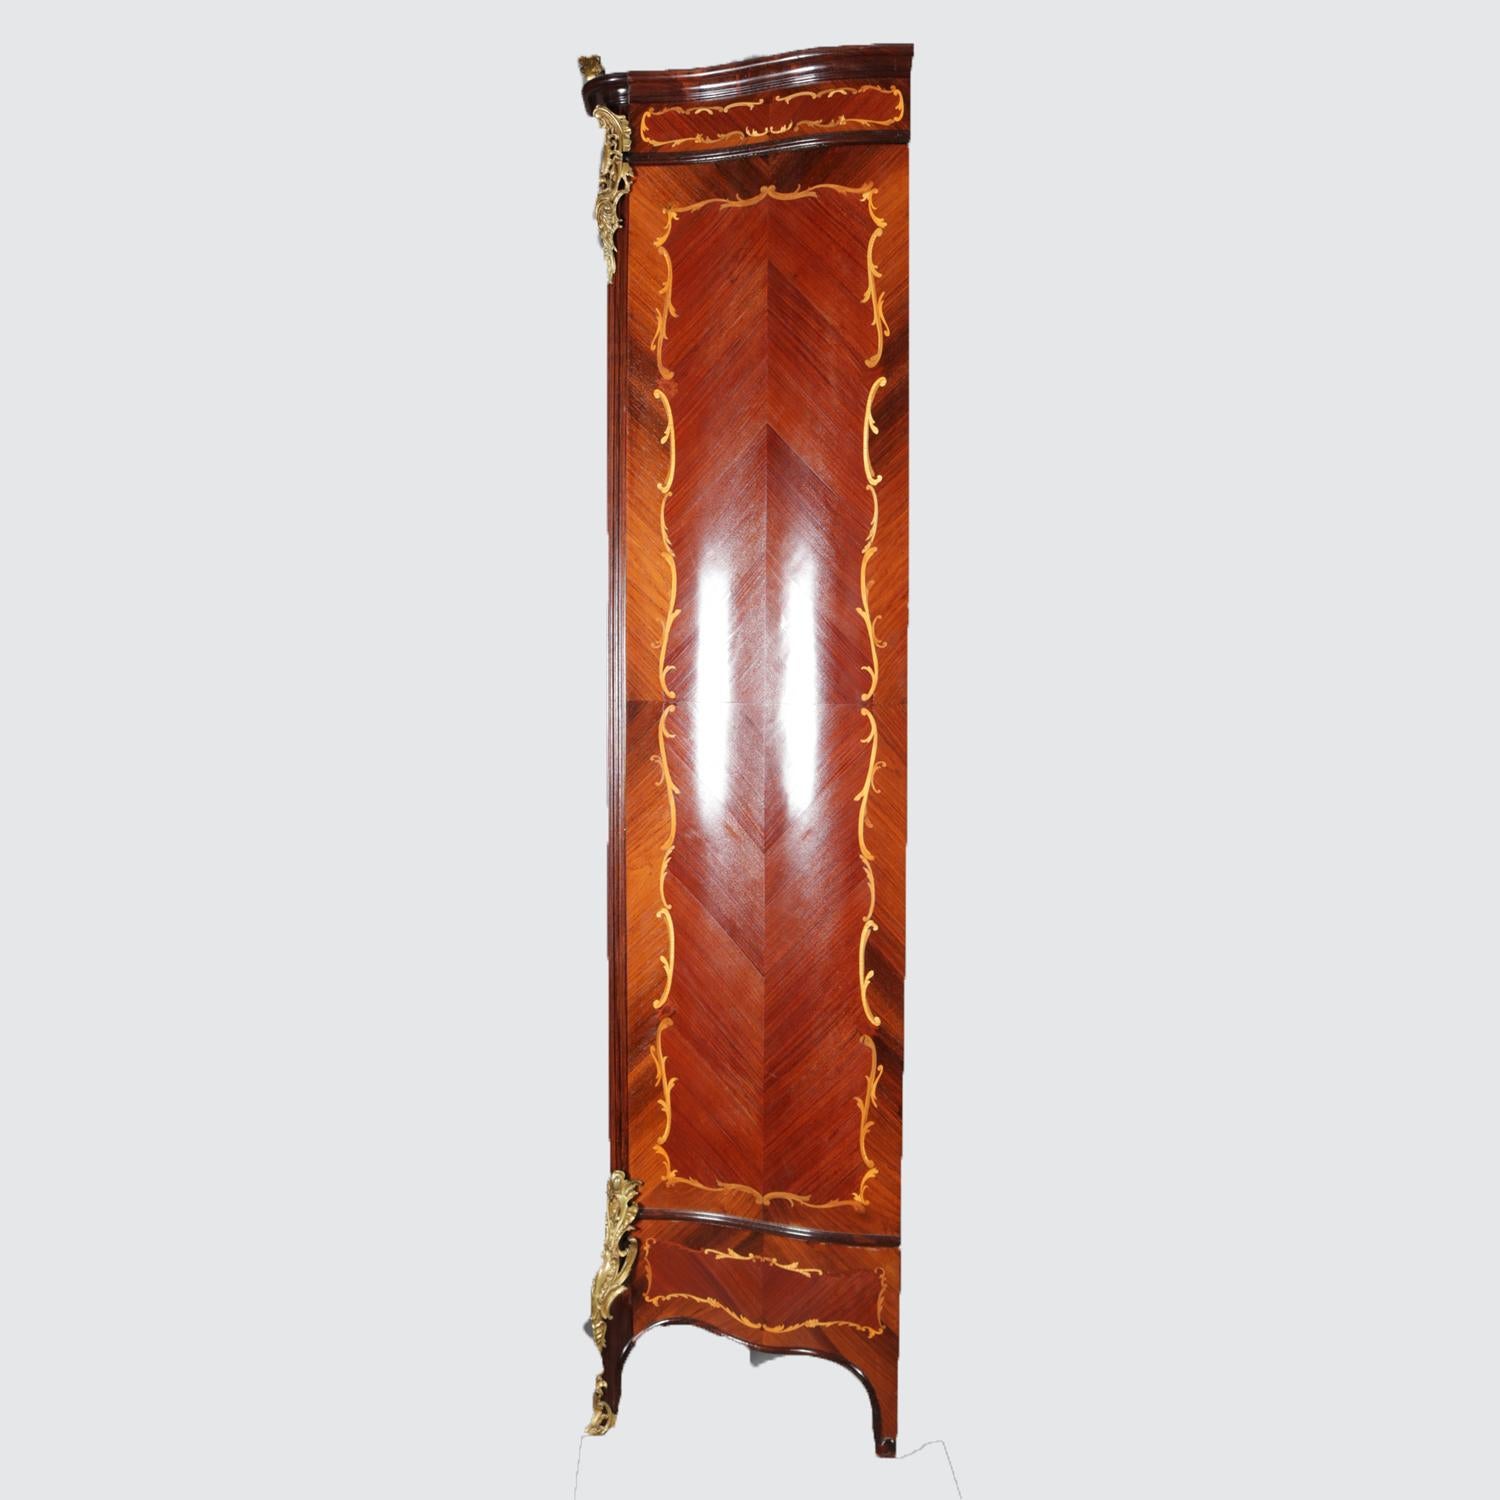 19th Century Antique French Louis XIV Style Inlaid Mahogany and Ormolu Mirrored Armoire